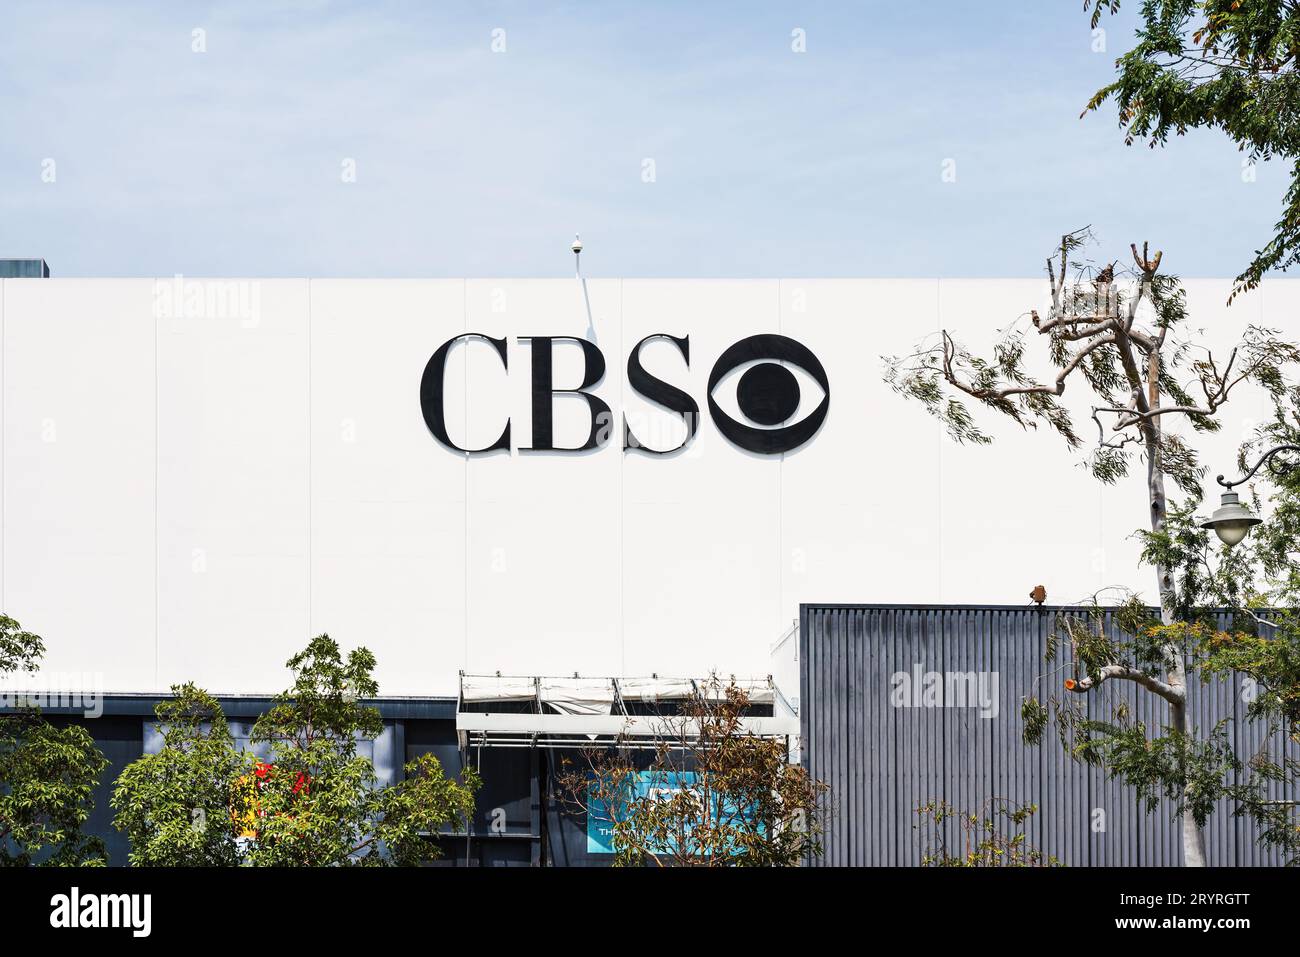 CBS American commercial broadcast television and radio network at Television City, located in the Fairfax District of Los Angeles, California, USA. Stock Photo